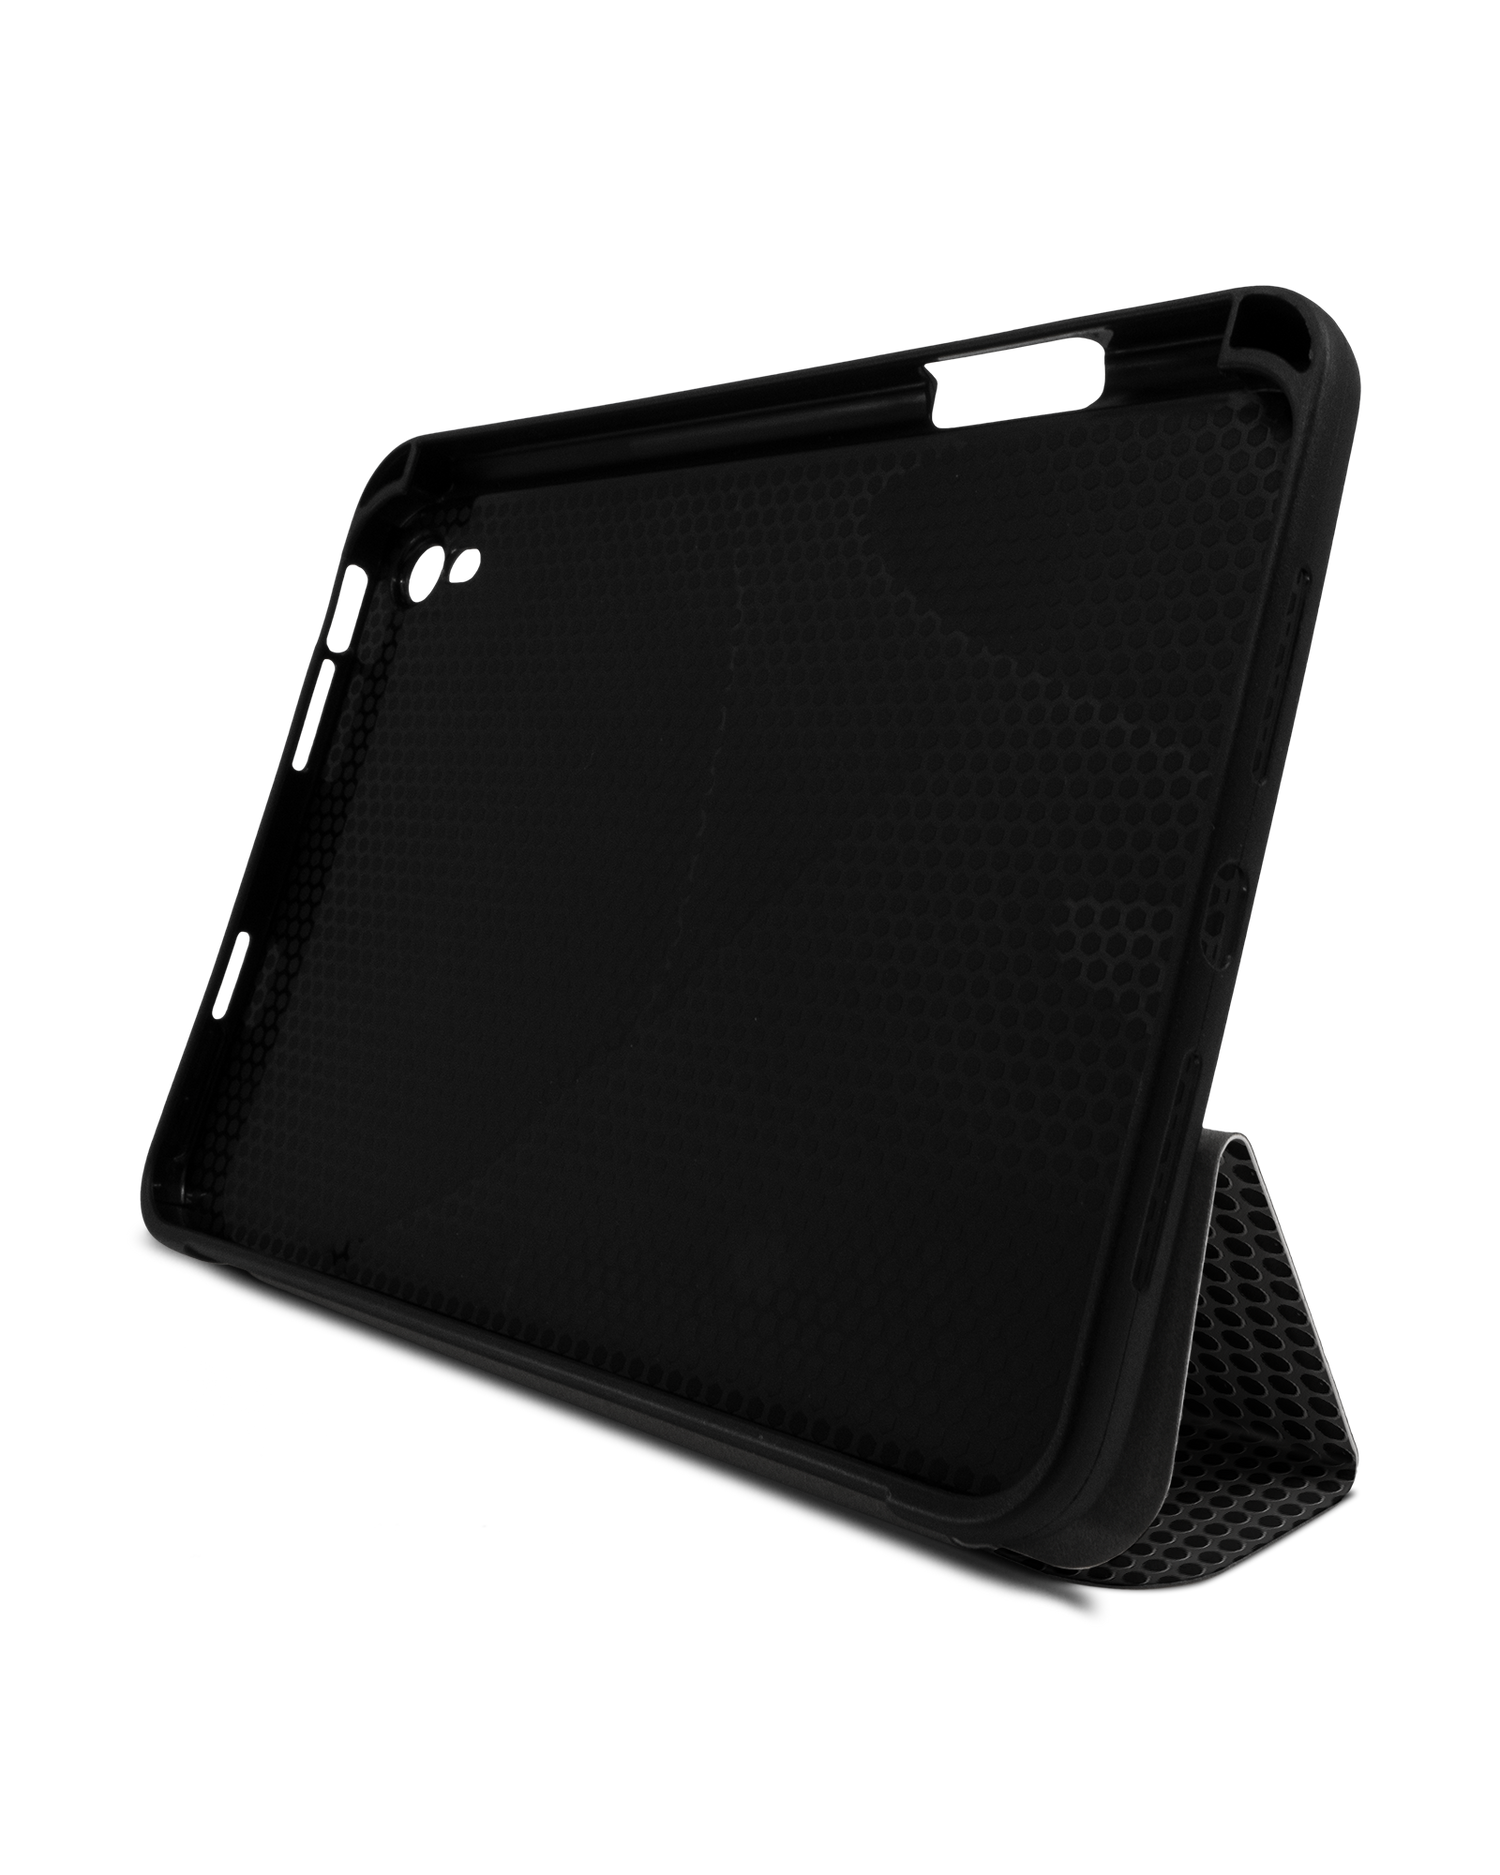 Carbon II iPad Case with Pencil Holder Apple iPad mini 6 (2021): Set up in landscape format (front view)